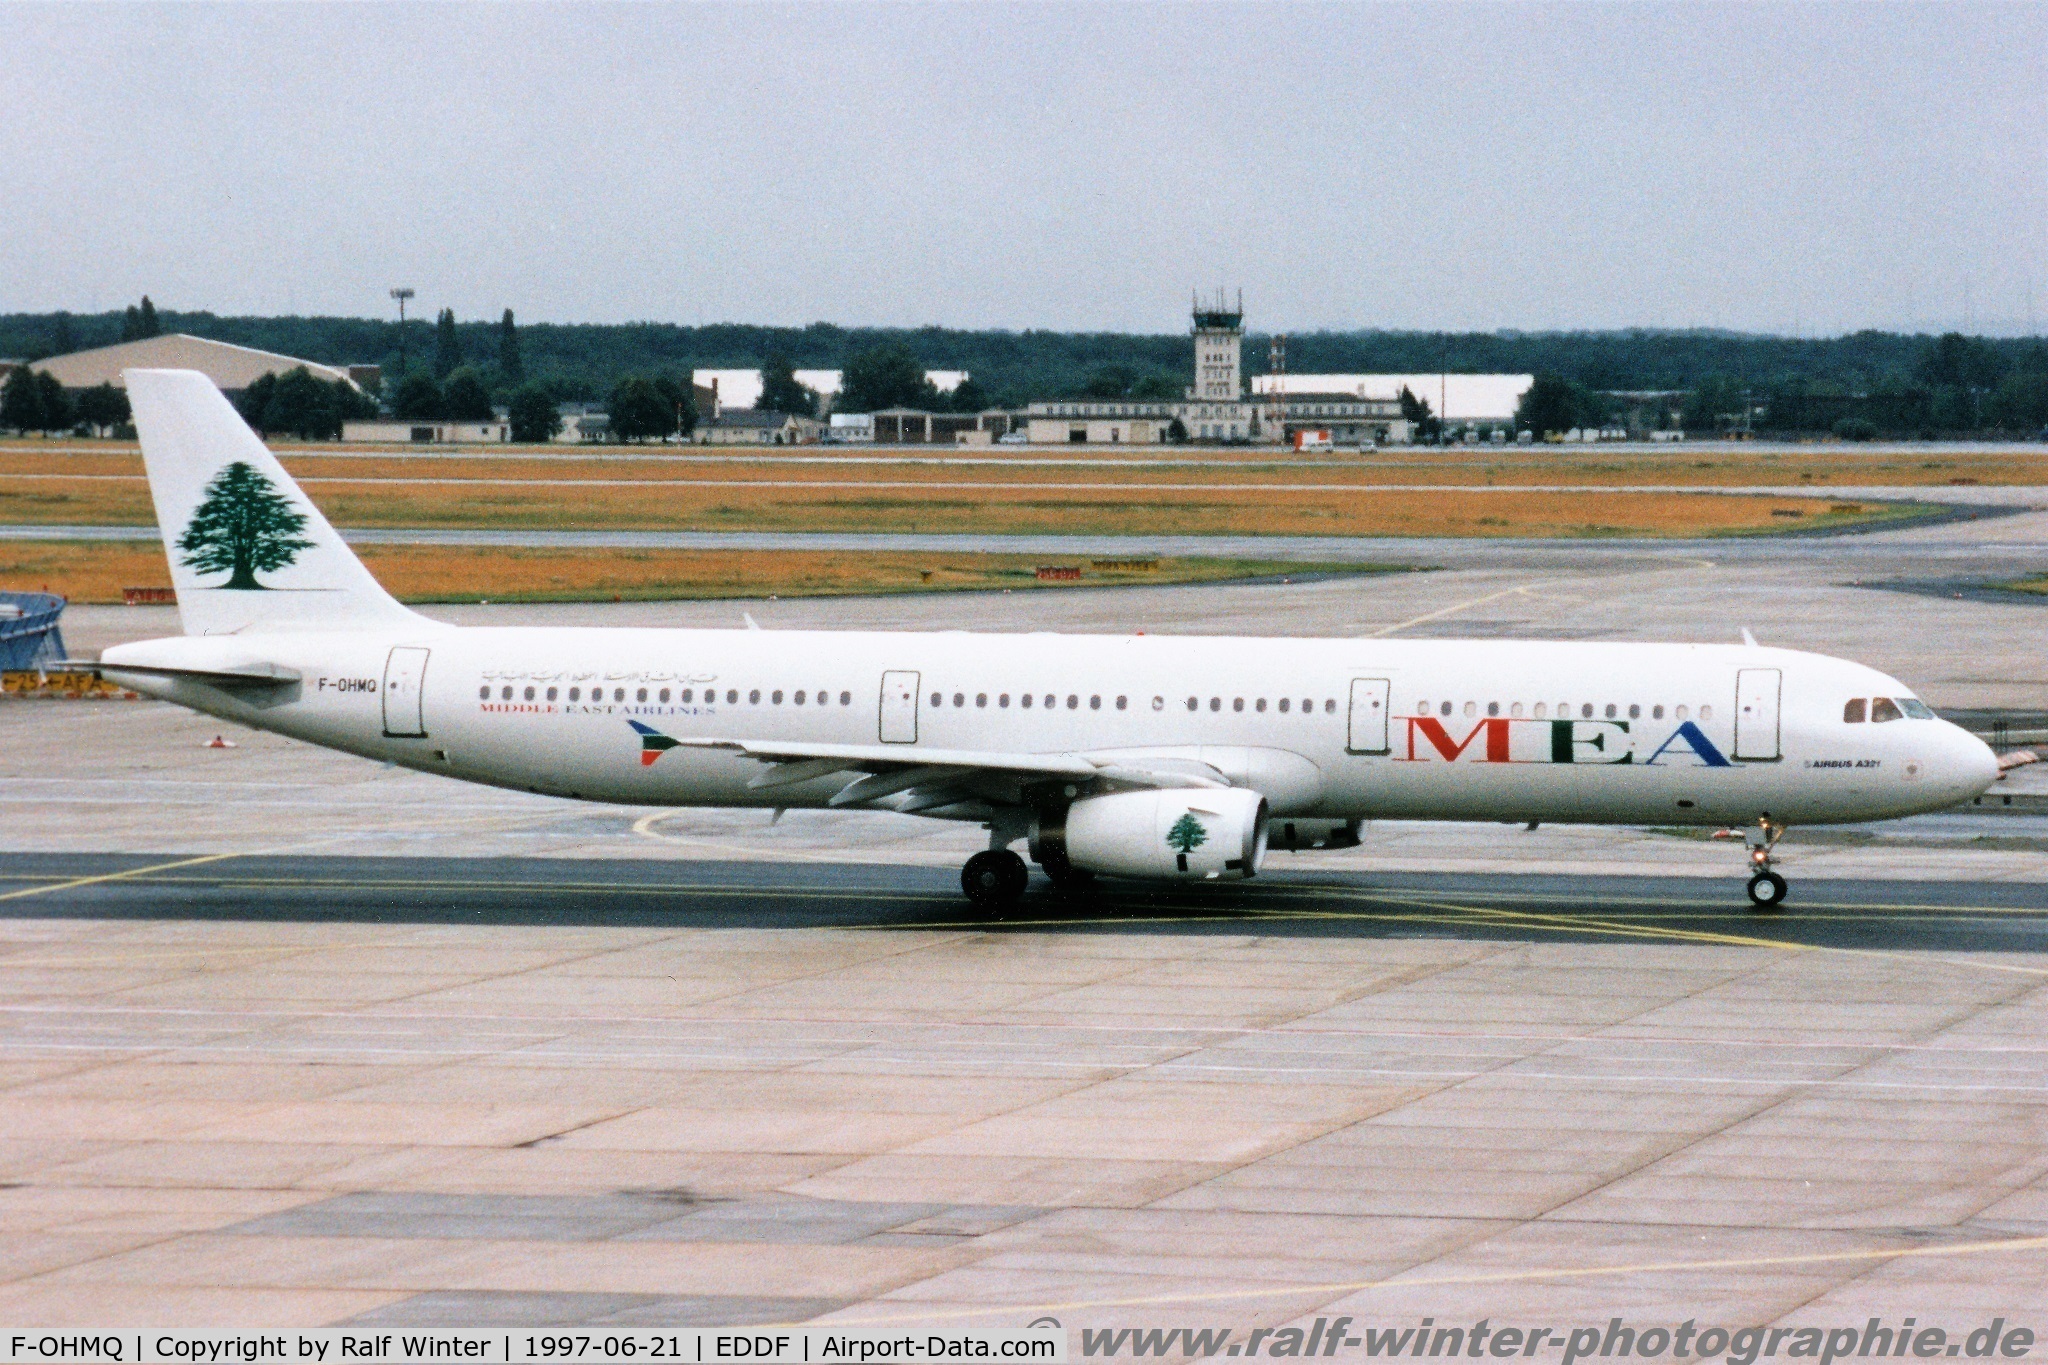 F-OHMQ, 1997 Airbus A321-231 C/N 668, Airbus A321-231 - ME MEA Middle East Airlines  - 668 - F-OHMQ - 06.1997 - FRA